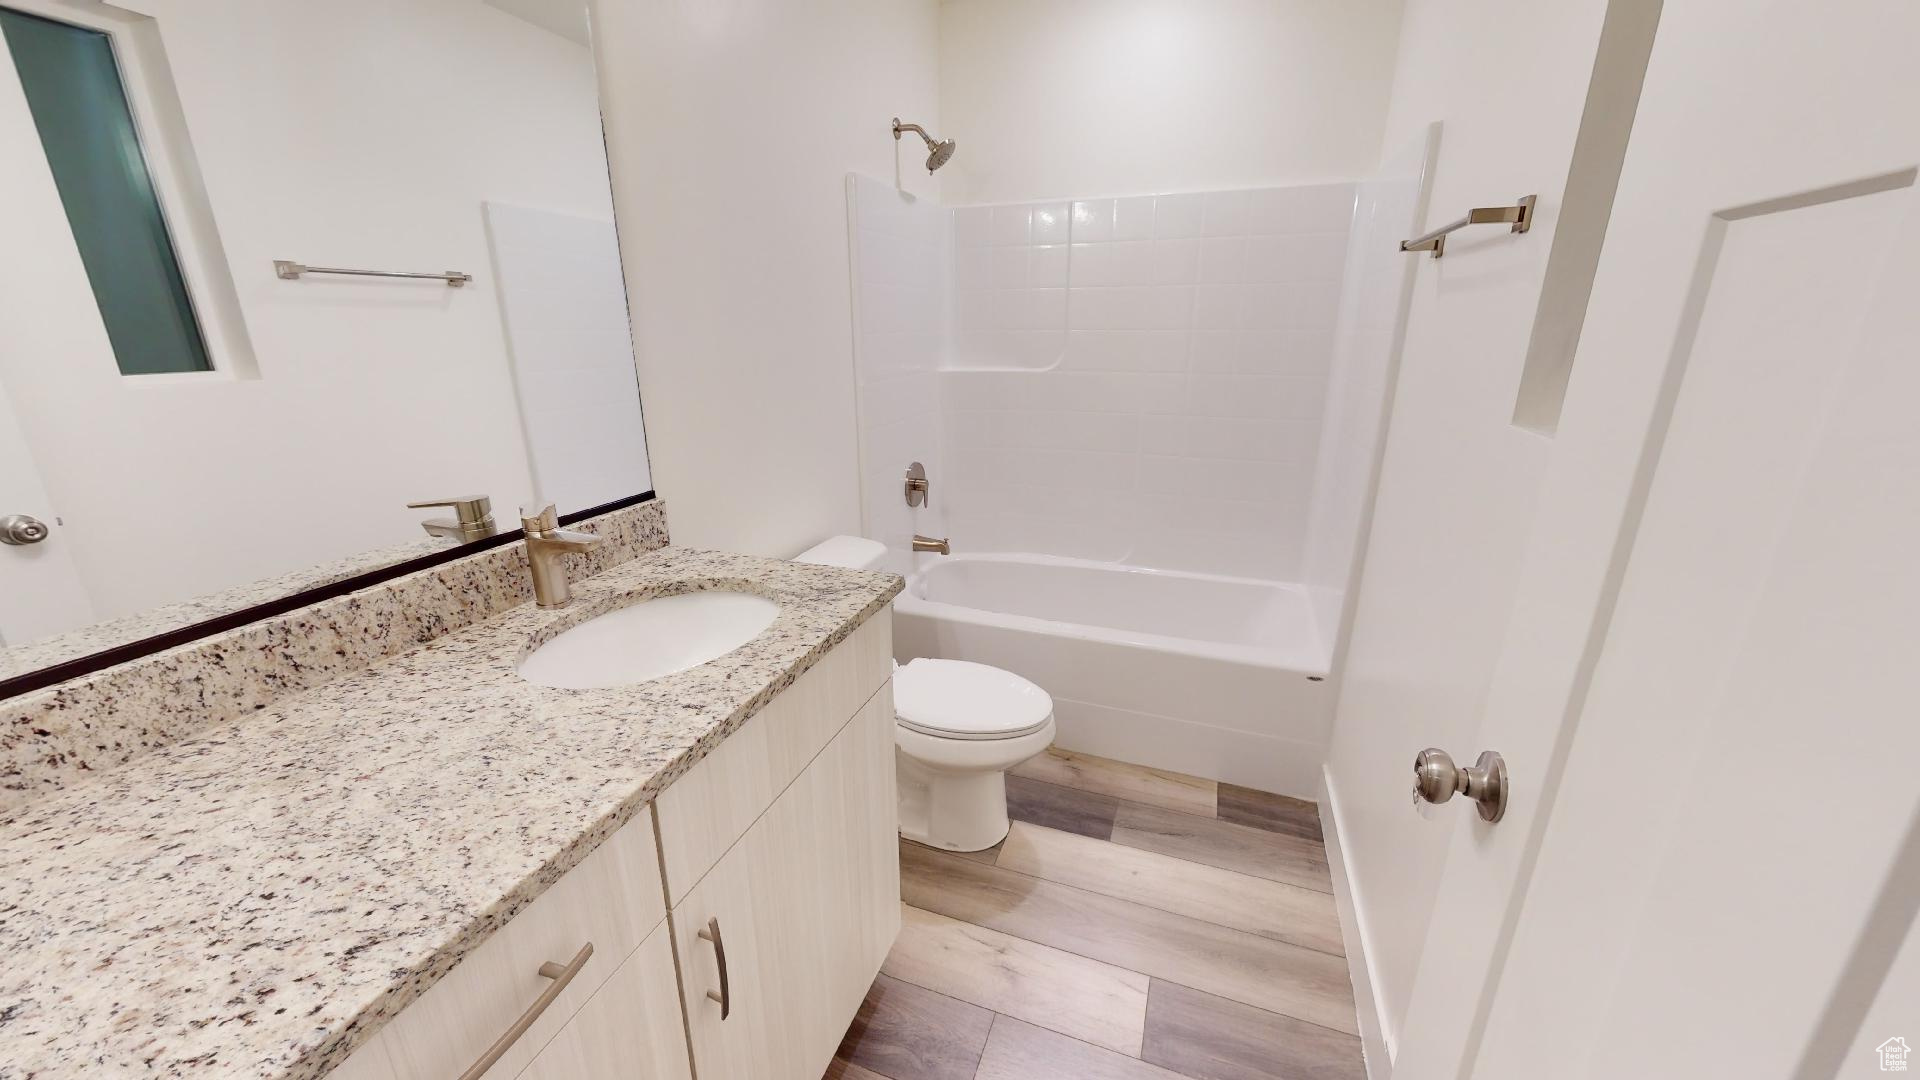 Full bathroom featuring washtub / shower combination, toilet, vanity with extensive cabinet space, and hardwood / wood-style flooring